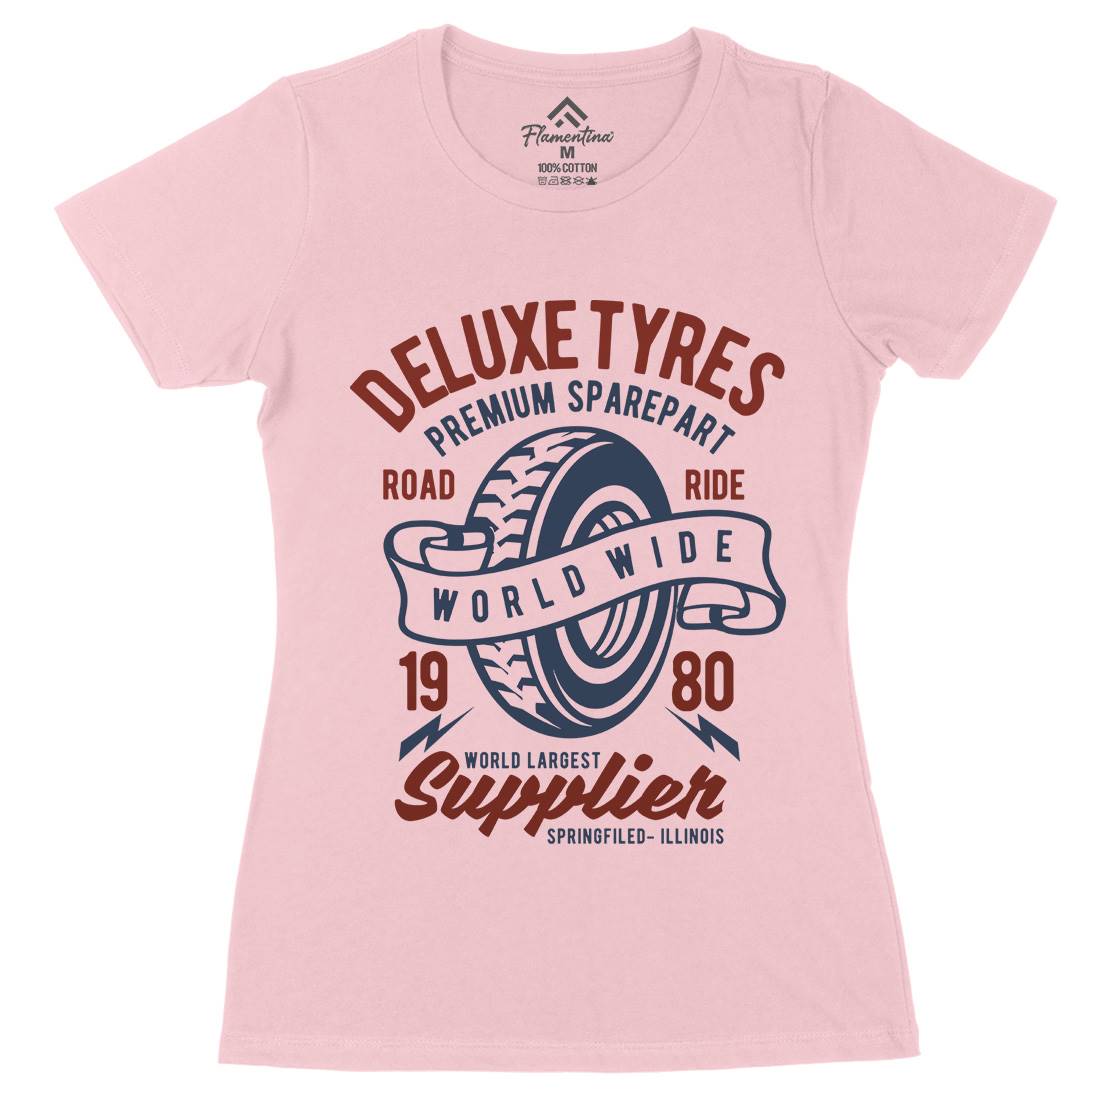 Deluxe Tyres Womens Organic Crew Neck T-Shirt Cars B204